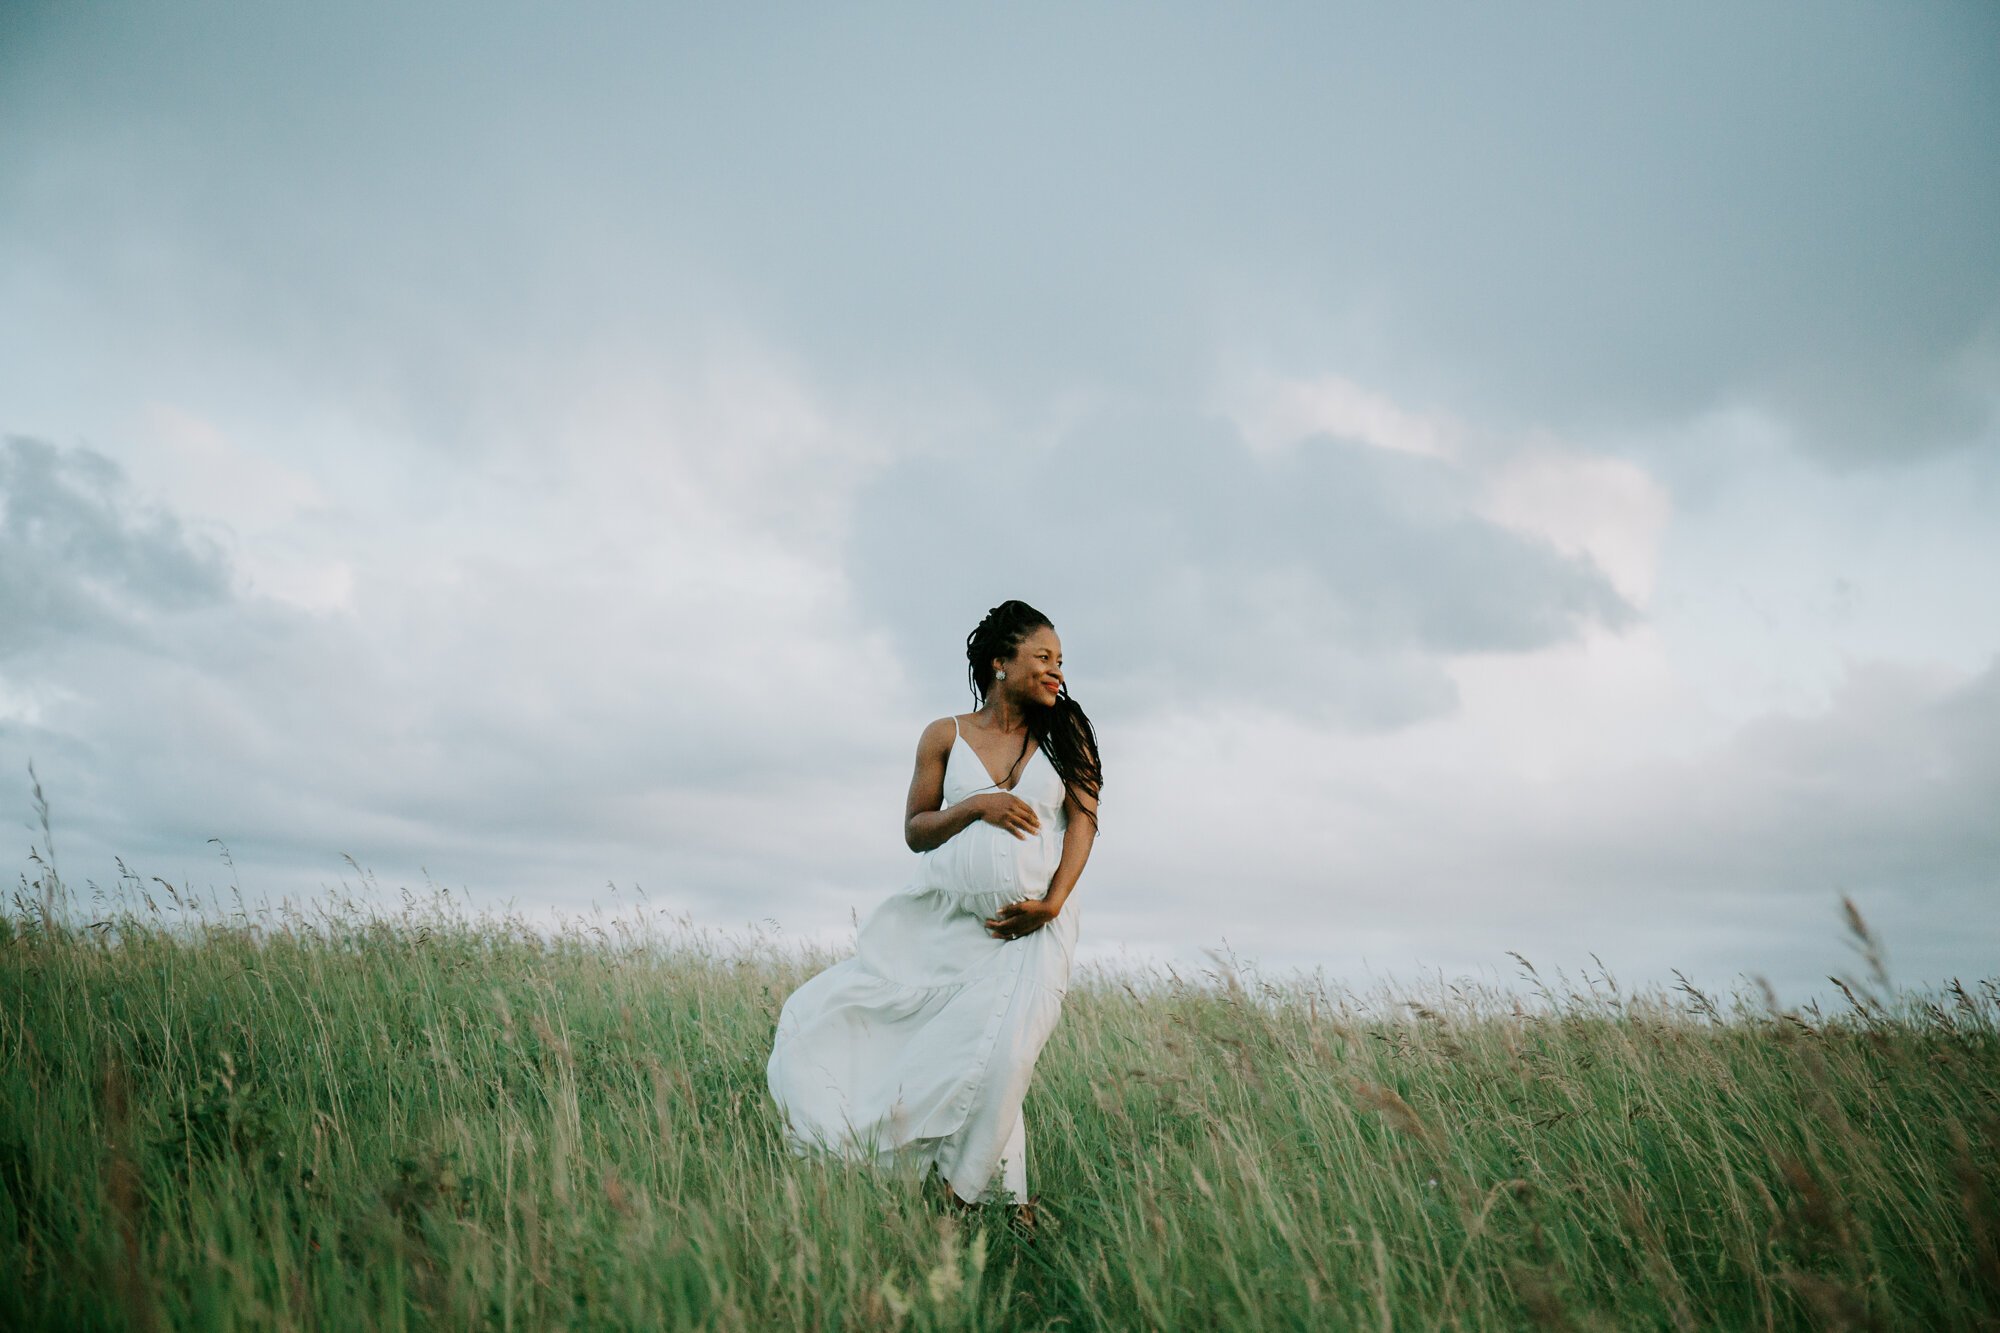  There’s so much I love about this photo - T’s expression on her face, the stormy skies behind, and her windswept dress. Everything came together perfectly. 